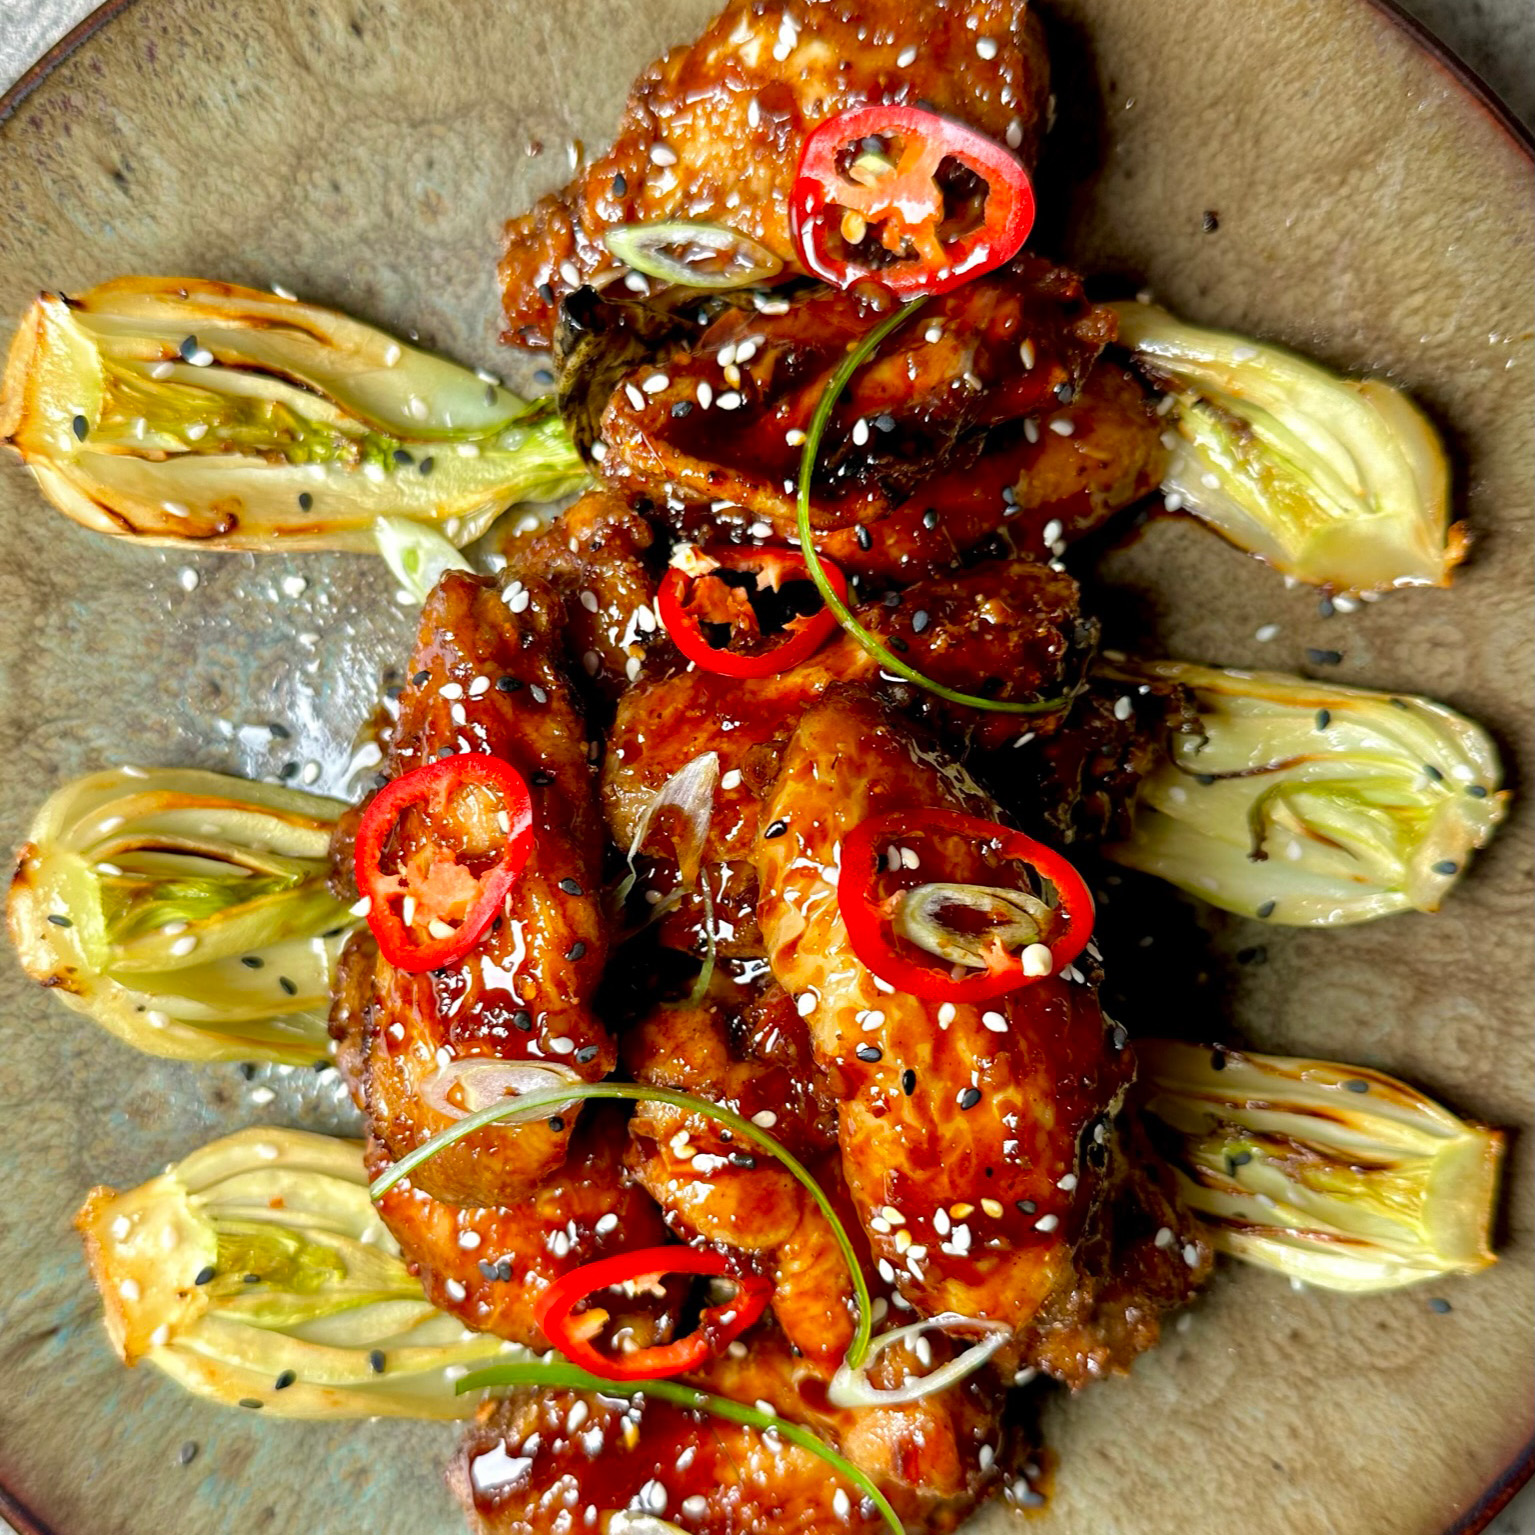 https://www.smokeandsear.world/wp-content/uploads/2022/12/Ninja-Woodfire-Asian-Style-Sweet-and-Sticky-Chicken-Wings-with-Air-Fried-Pak-Choi-Photo-16.jpg